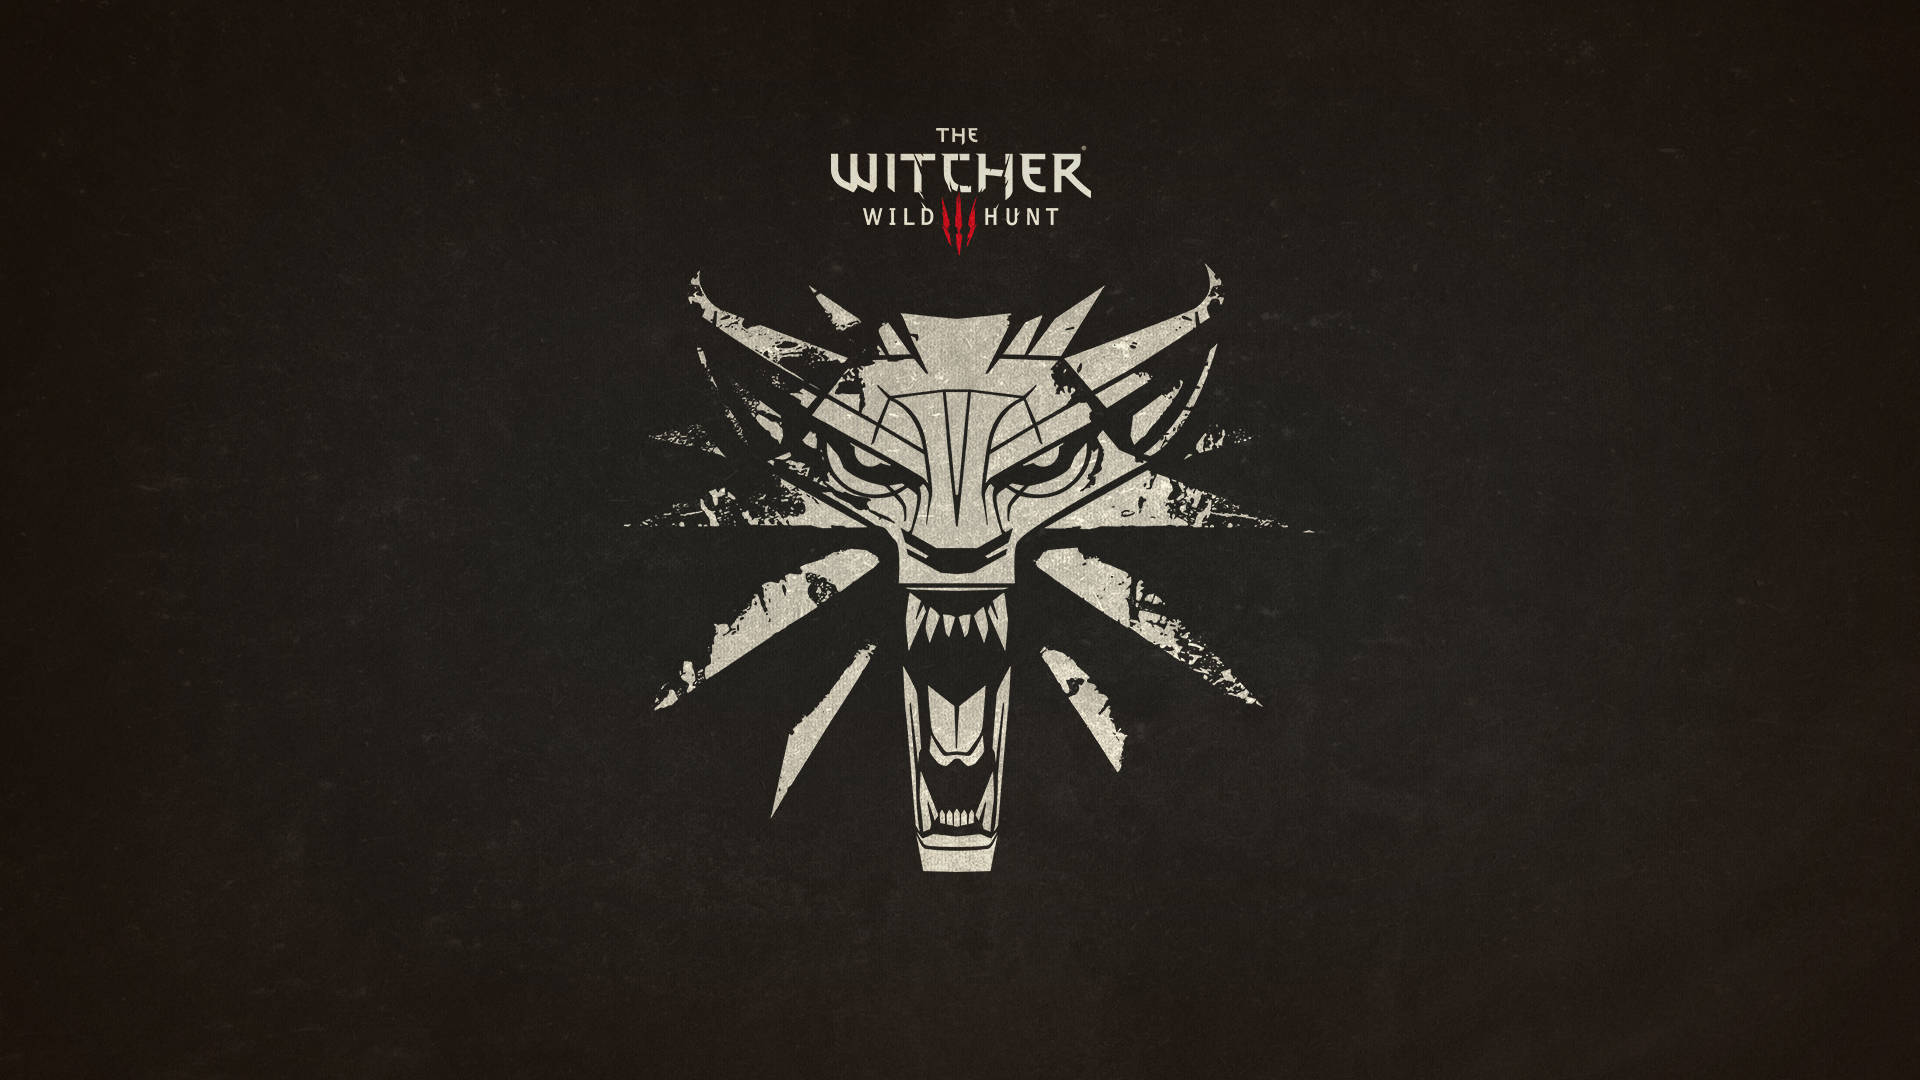 "The Medallion of Geralt of Rivia, a witcher featured in The Witcher 3." Wallpaper